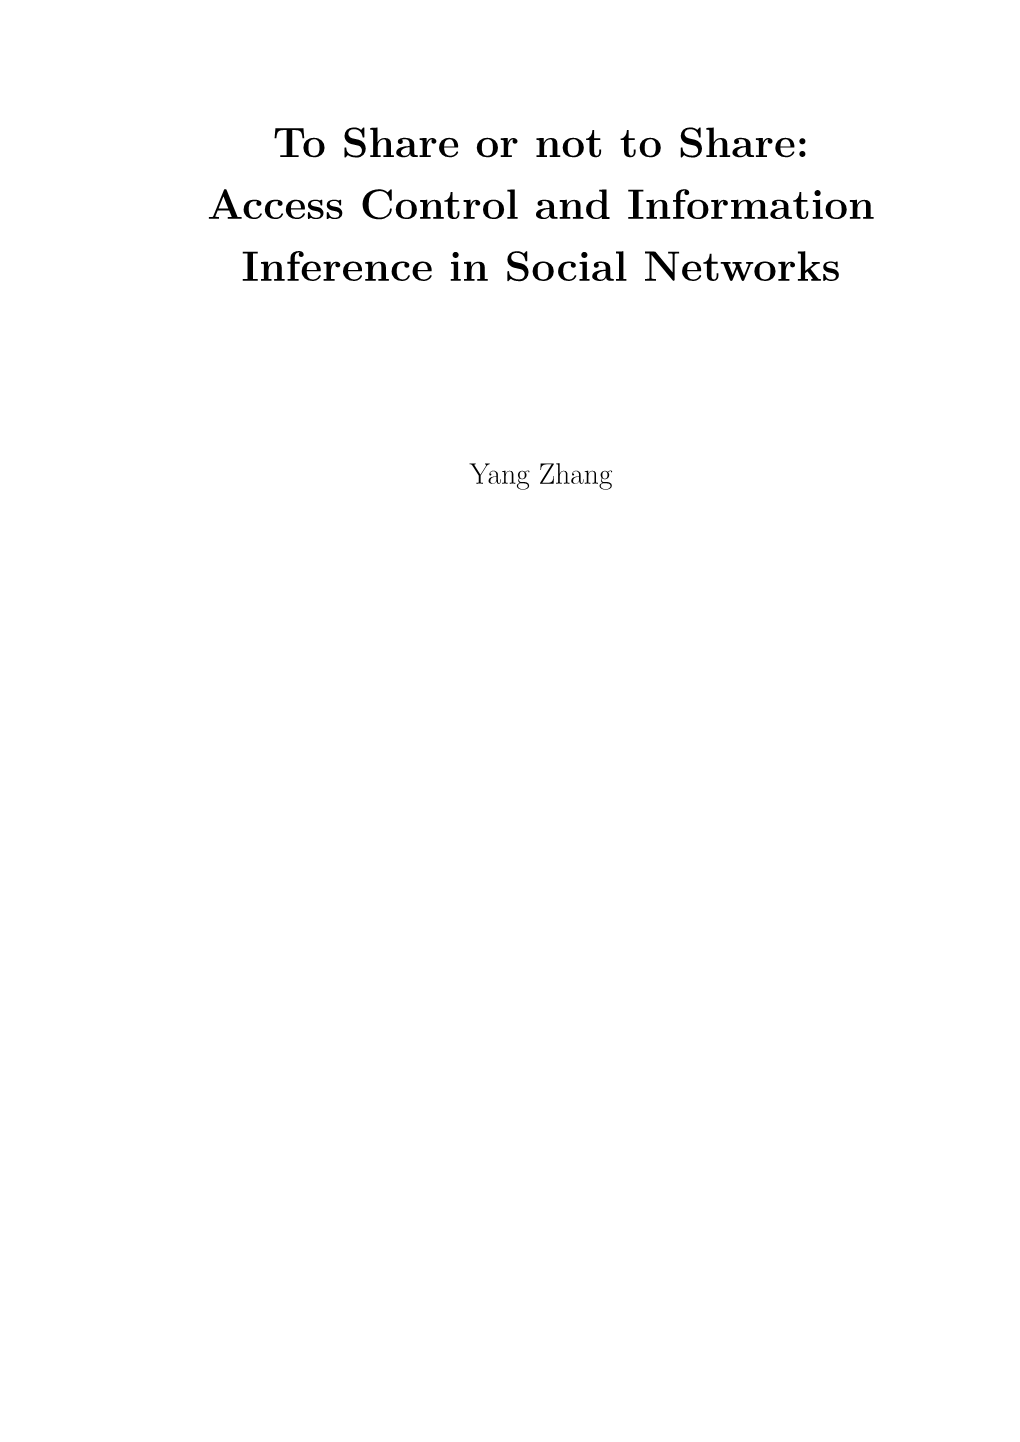 Access Control and Information Inference in Social Networks